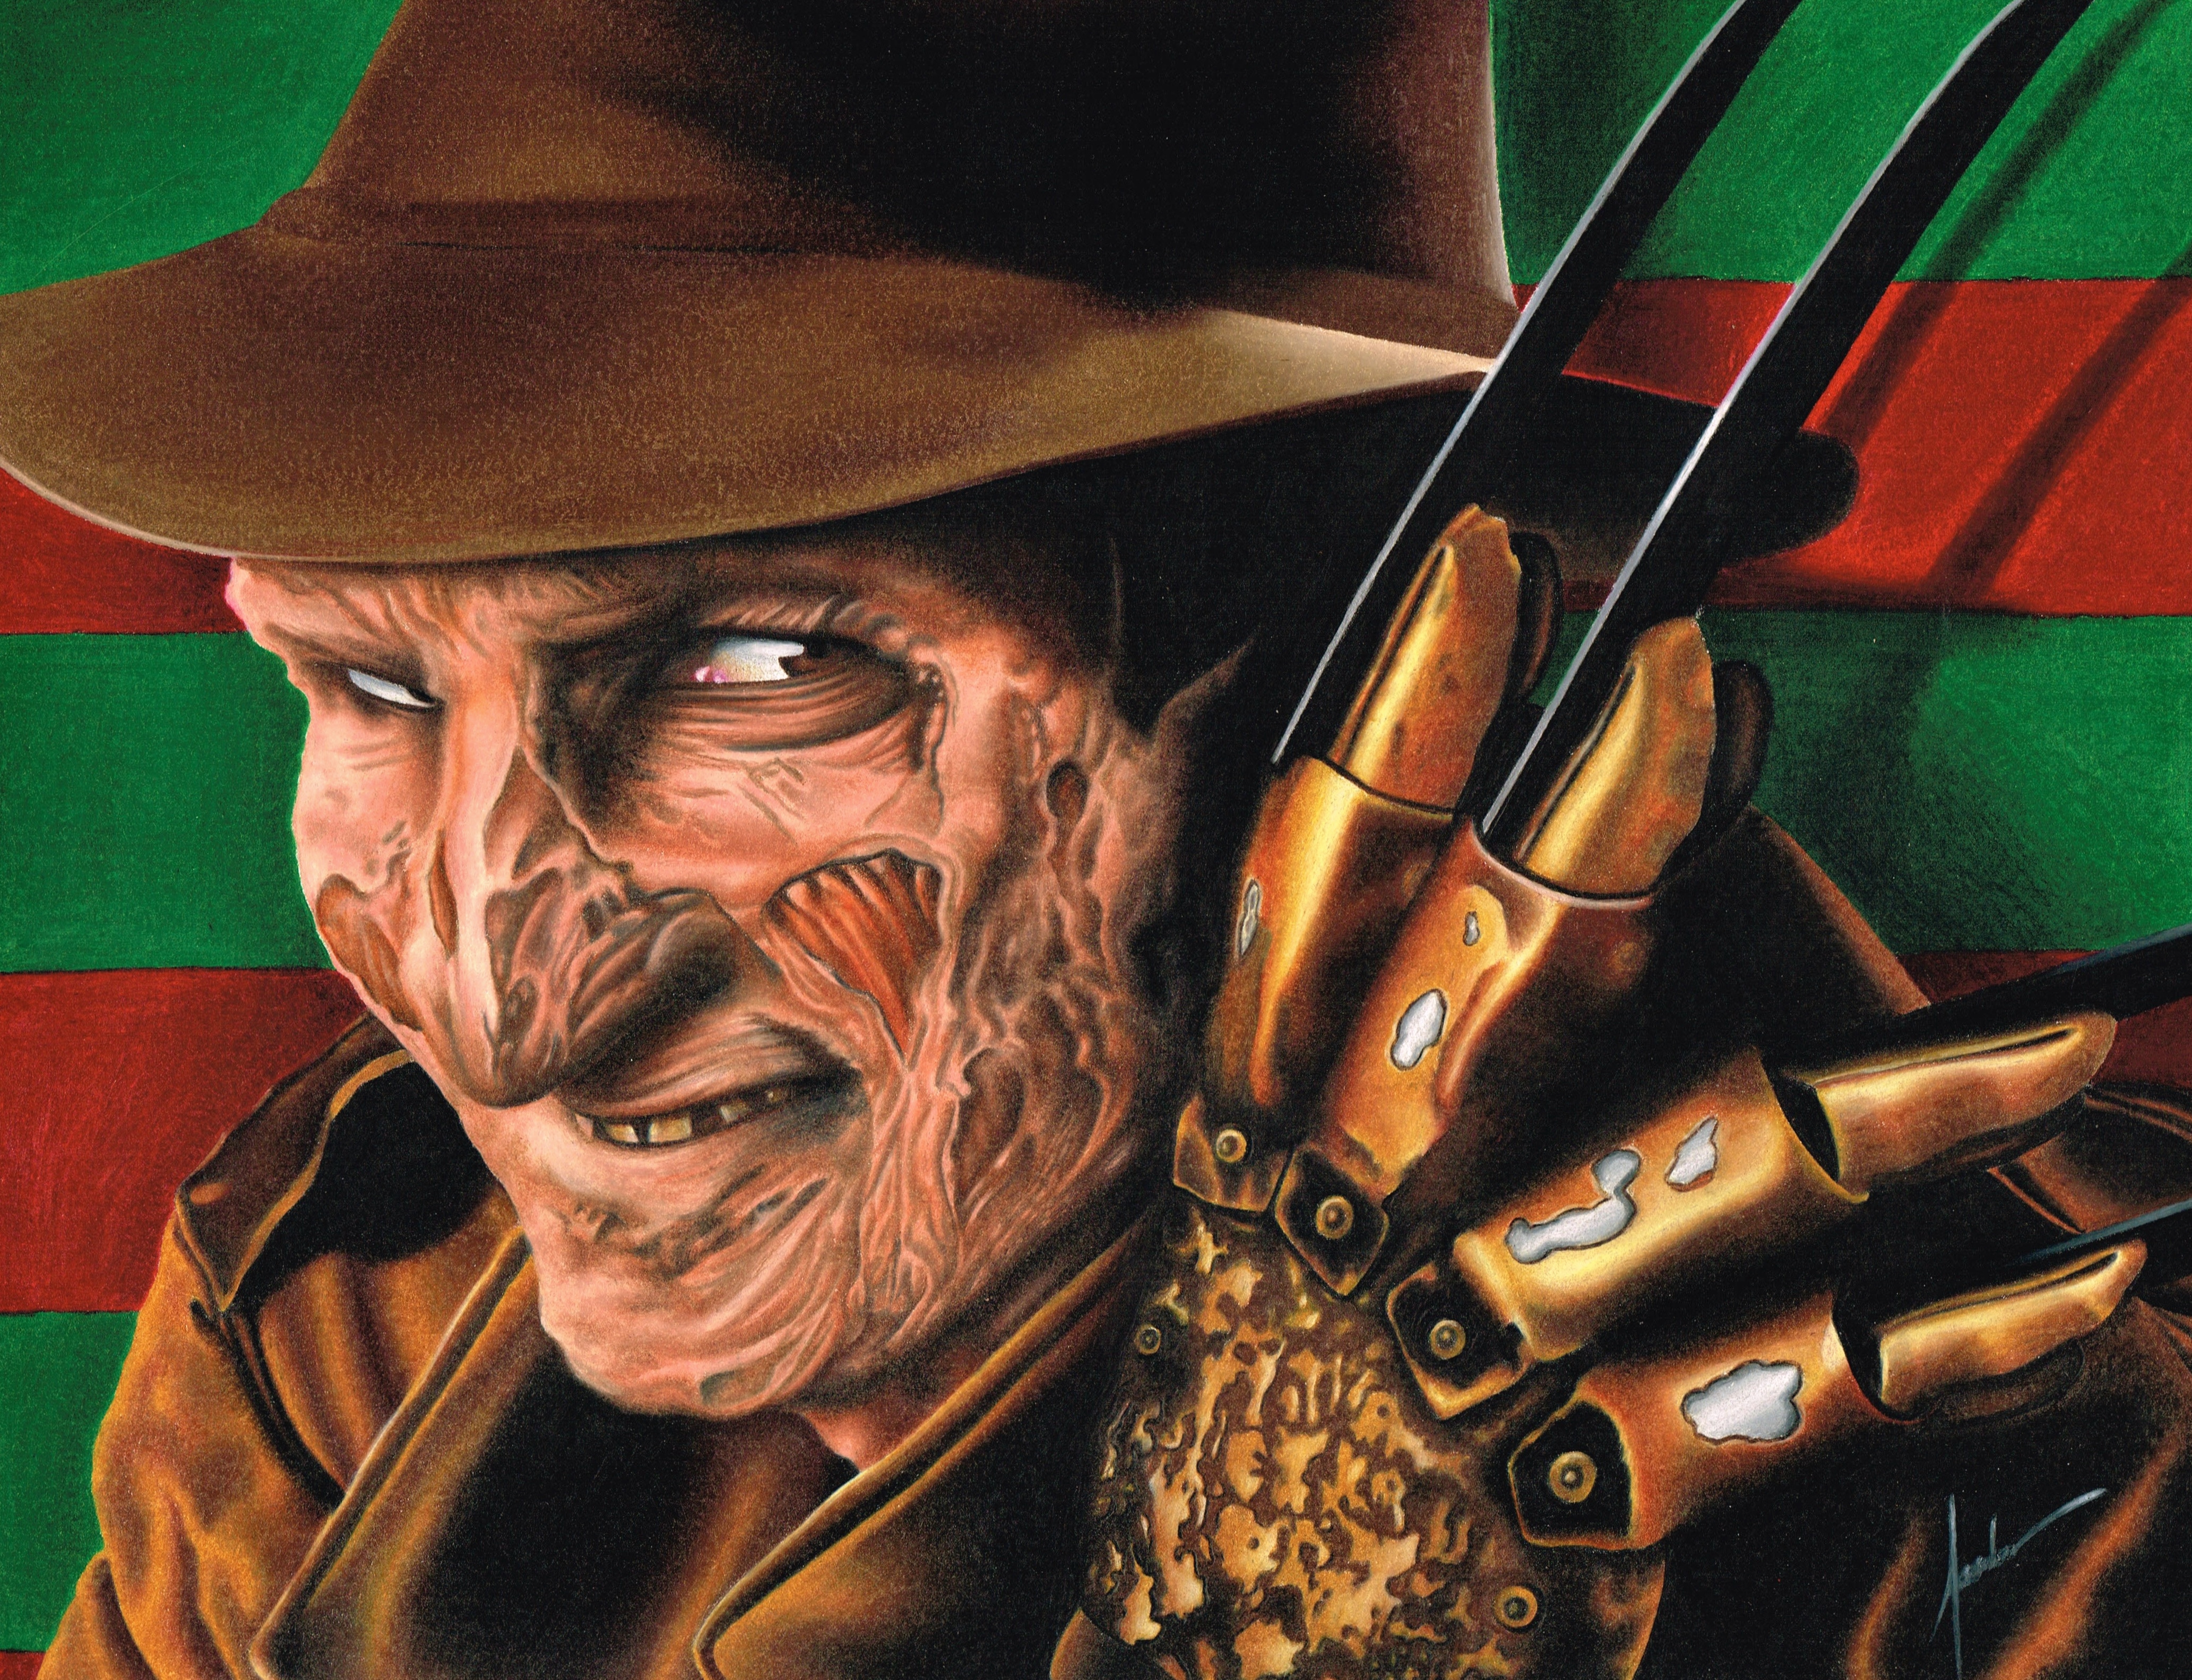 Download free Wallpapers of Freddy Krueger in high resolution and high qual...